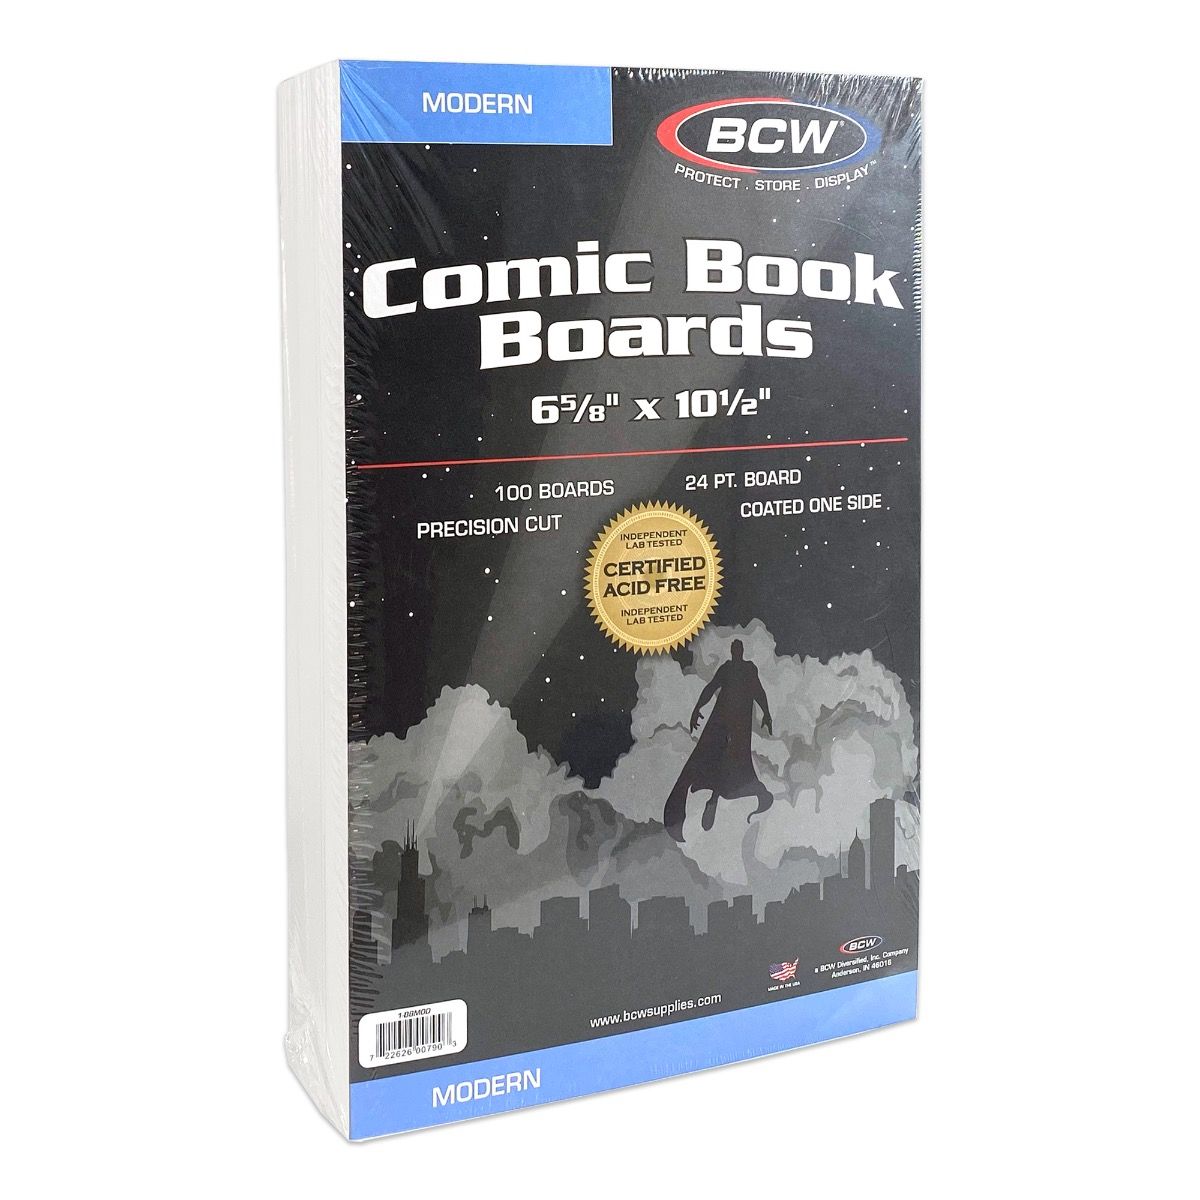 BCW Thick Modern/Current Comic Book Bags - 7 x 10 1/2 (100 Pack) 